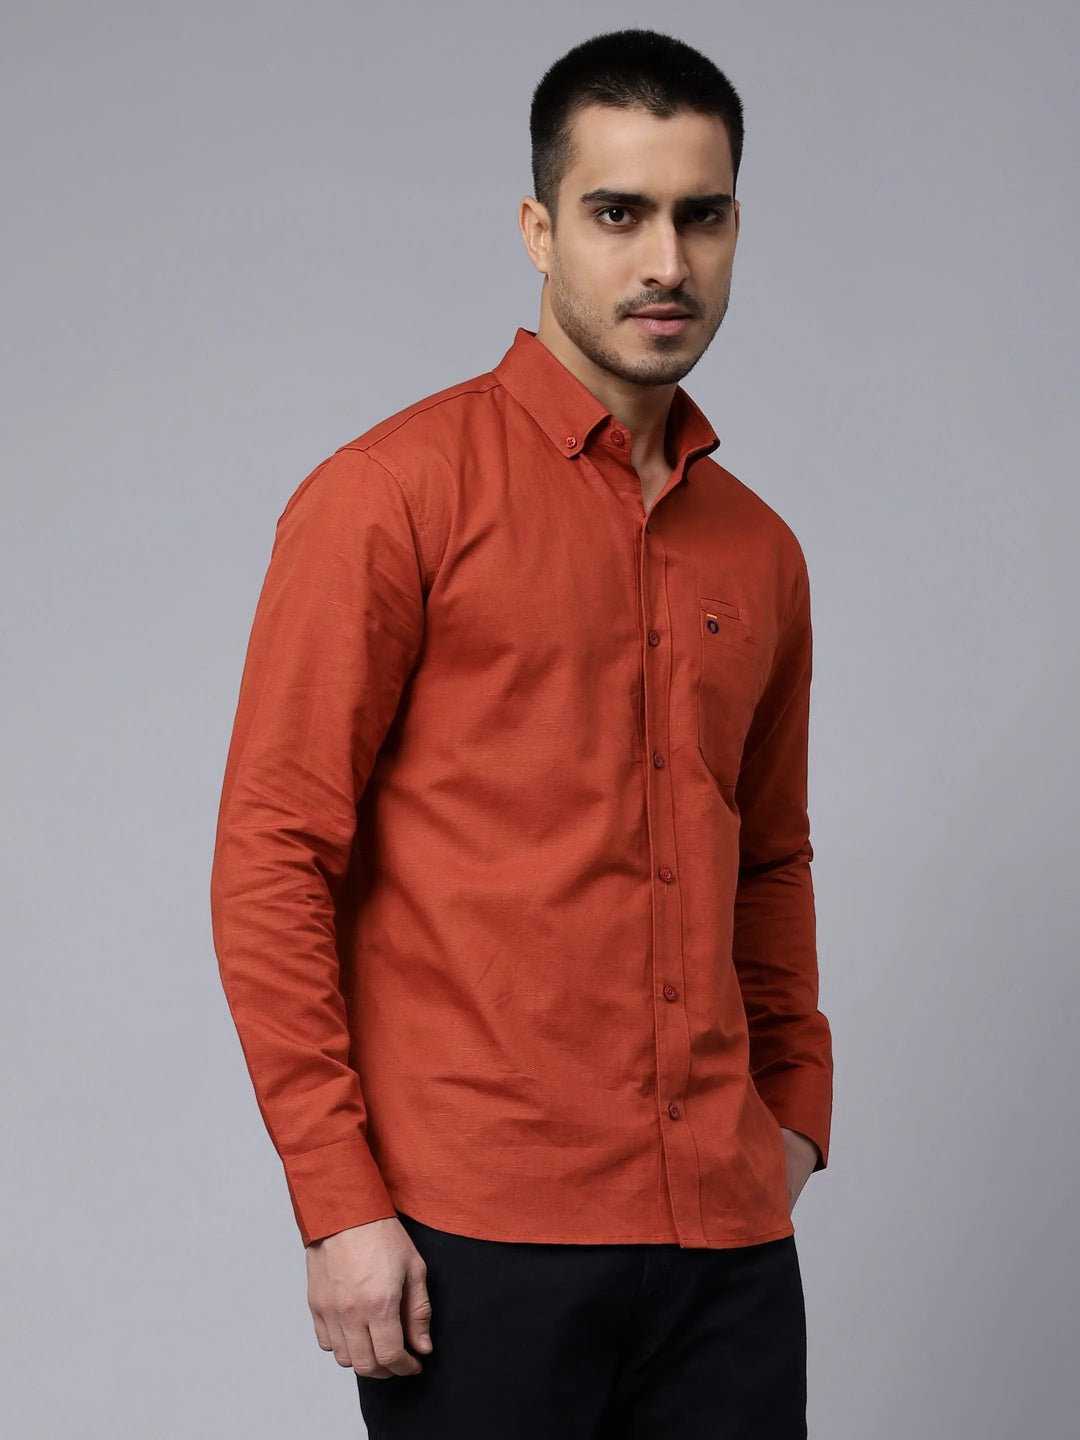 Regular Fit Cotton Solid Rust Casual Shirt For Men